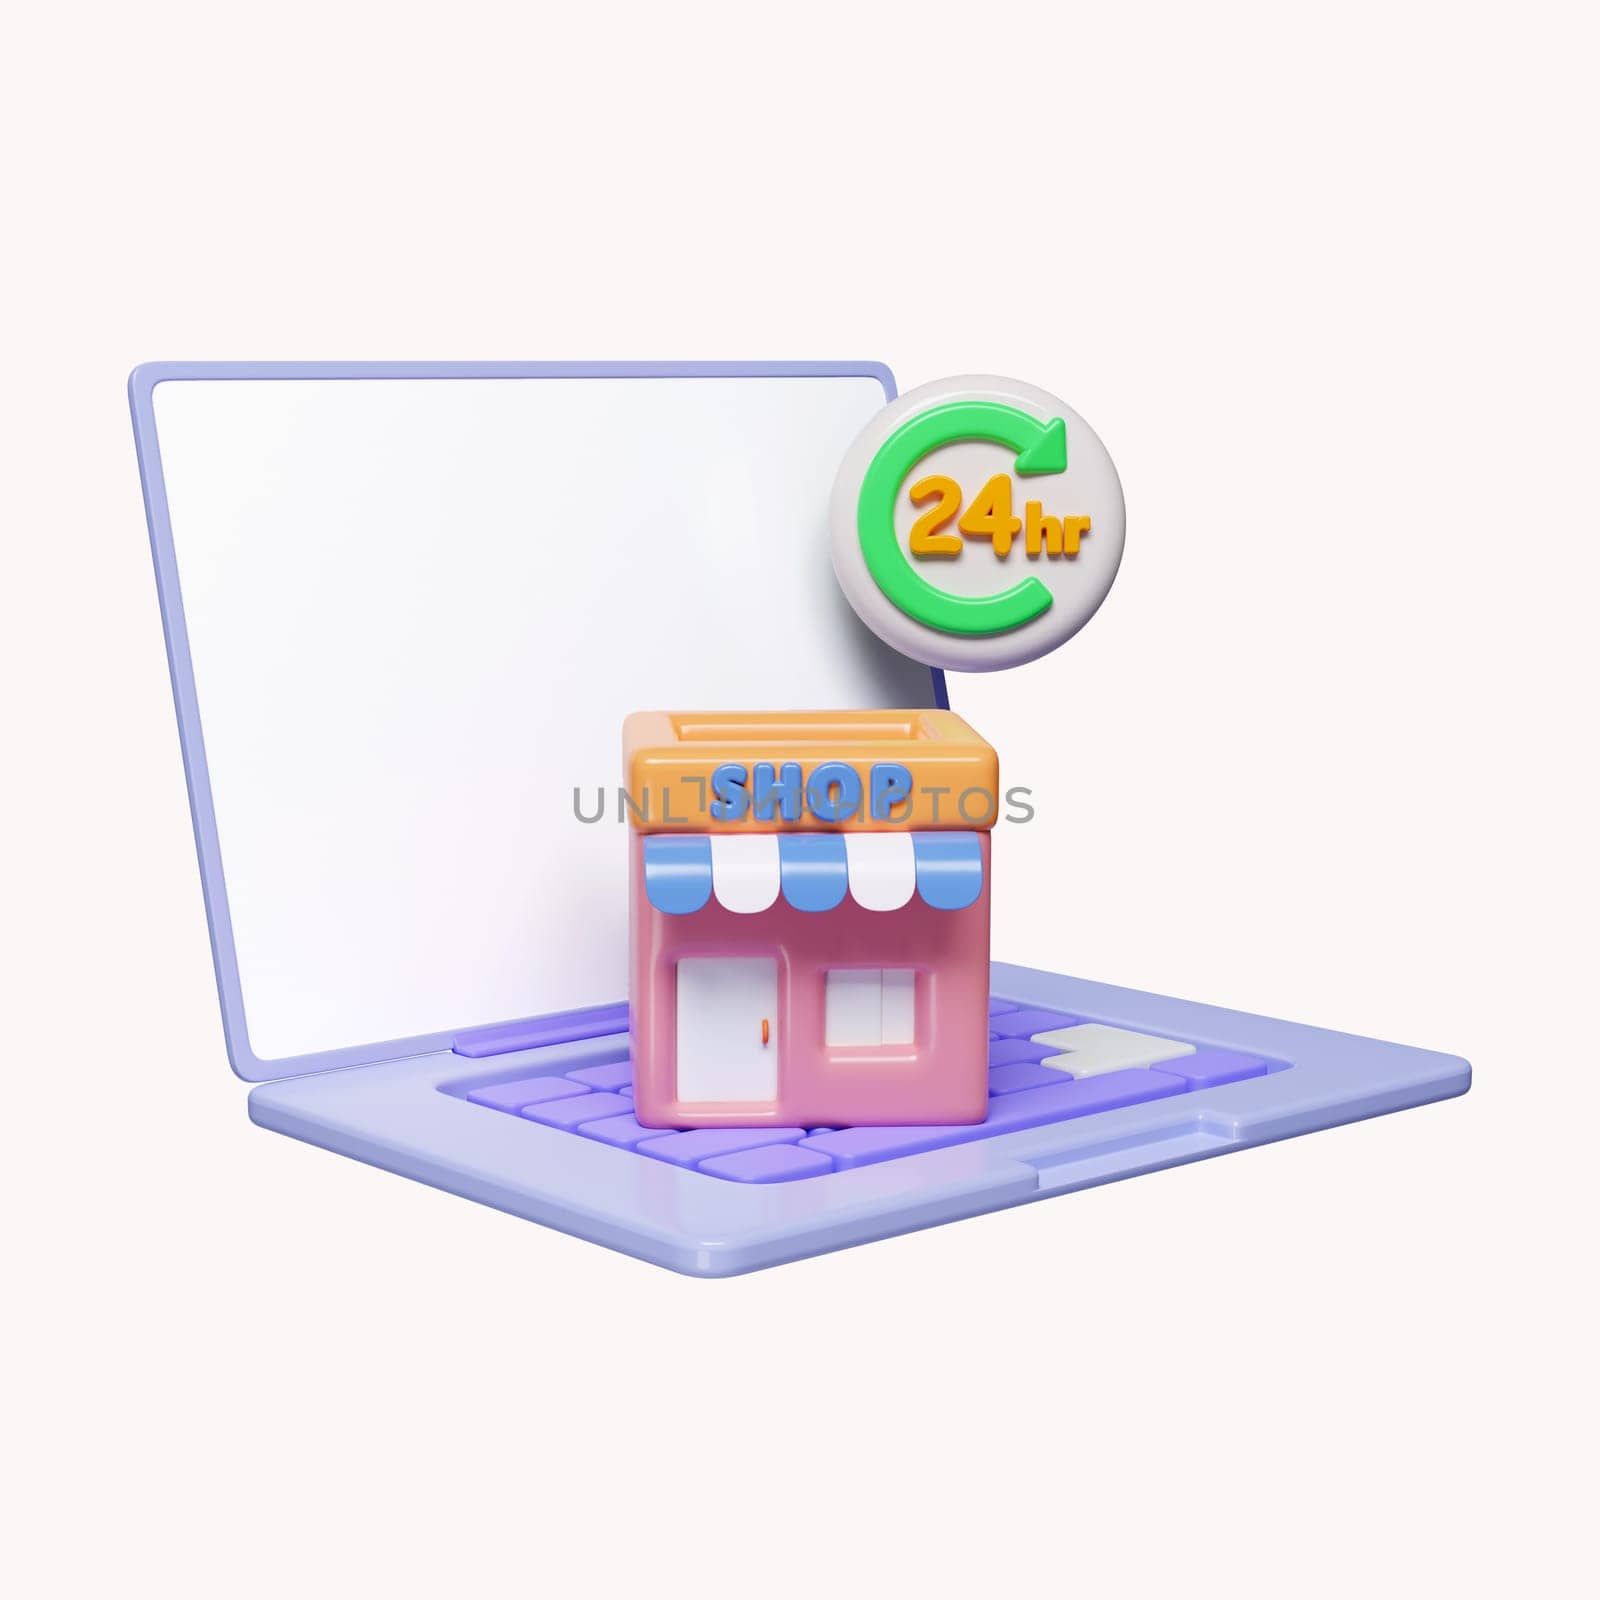 3d online shopping E-commerce, store, box, 24 hours on laptop. Marketplace online. icon isolated on white background. 3d rendering illustration. Clipping path..